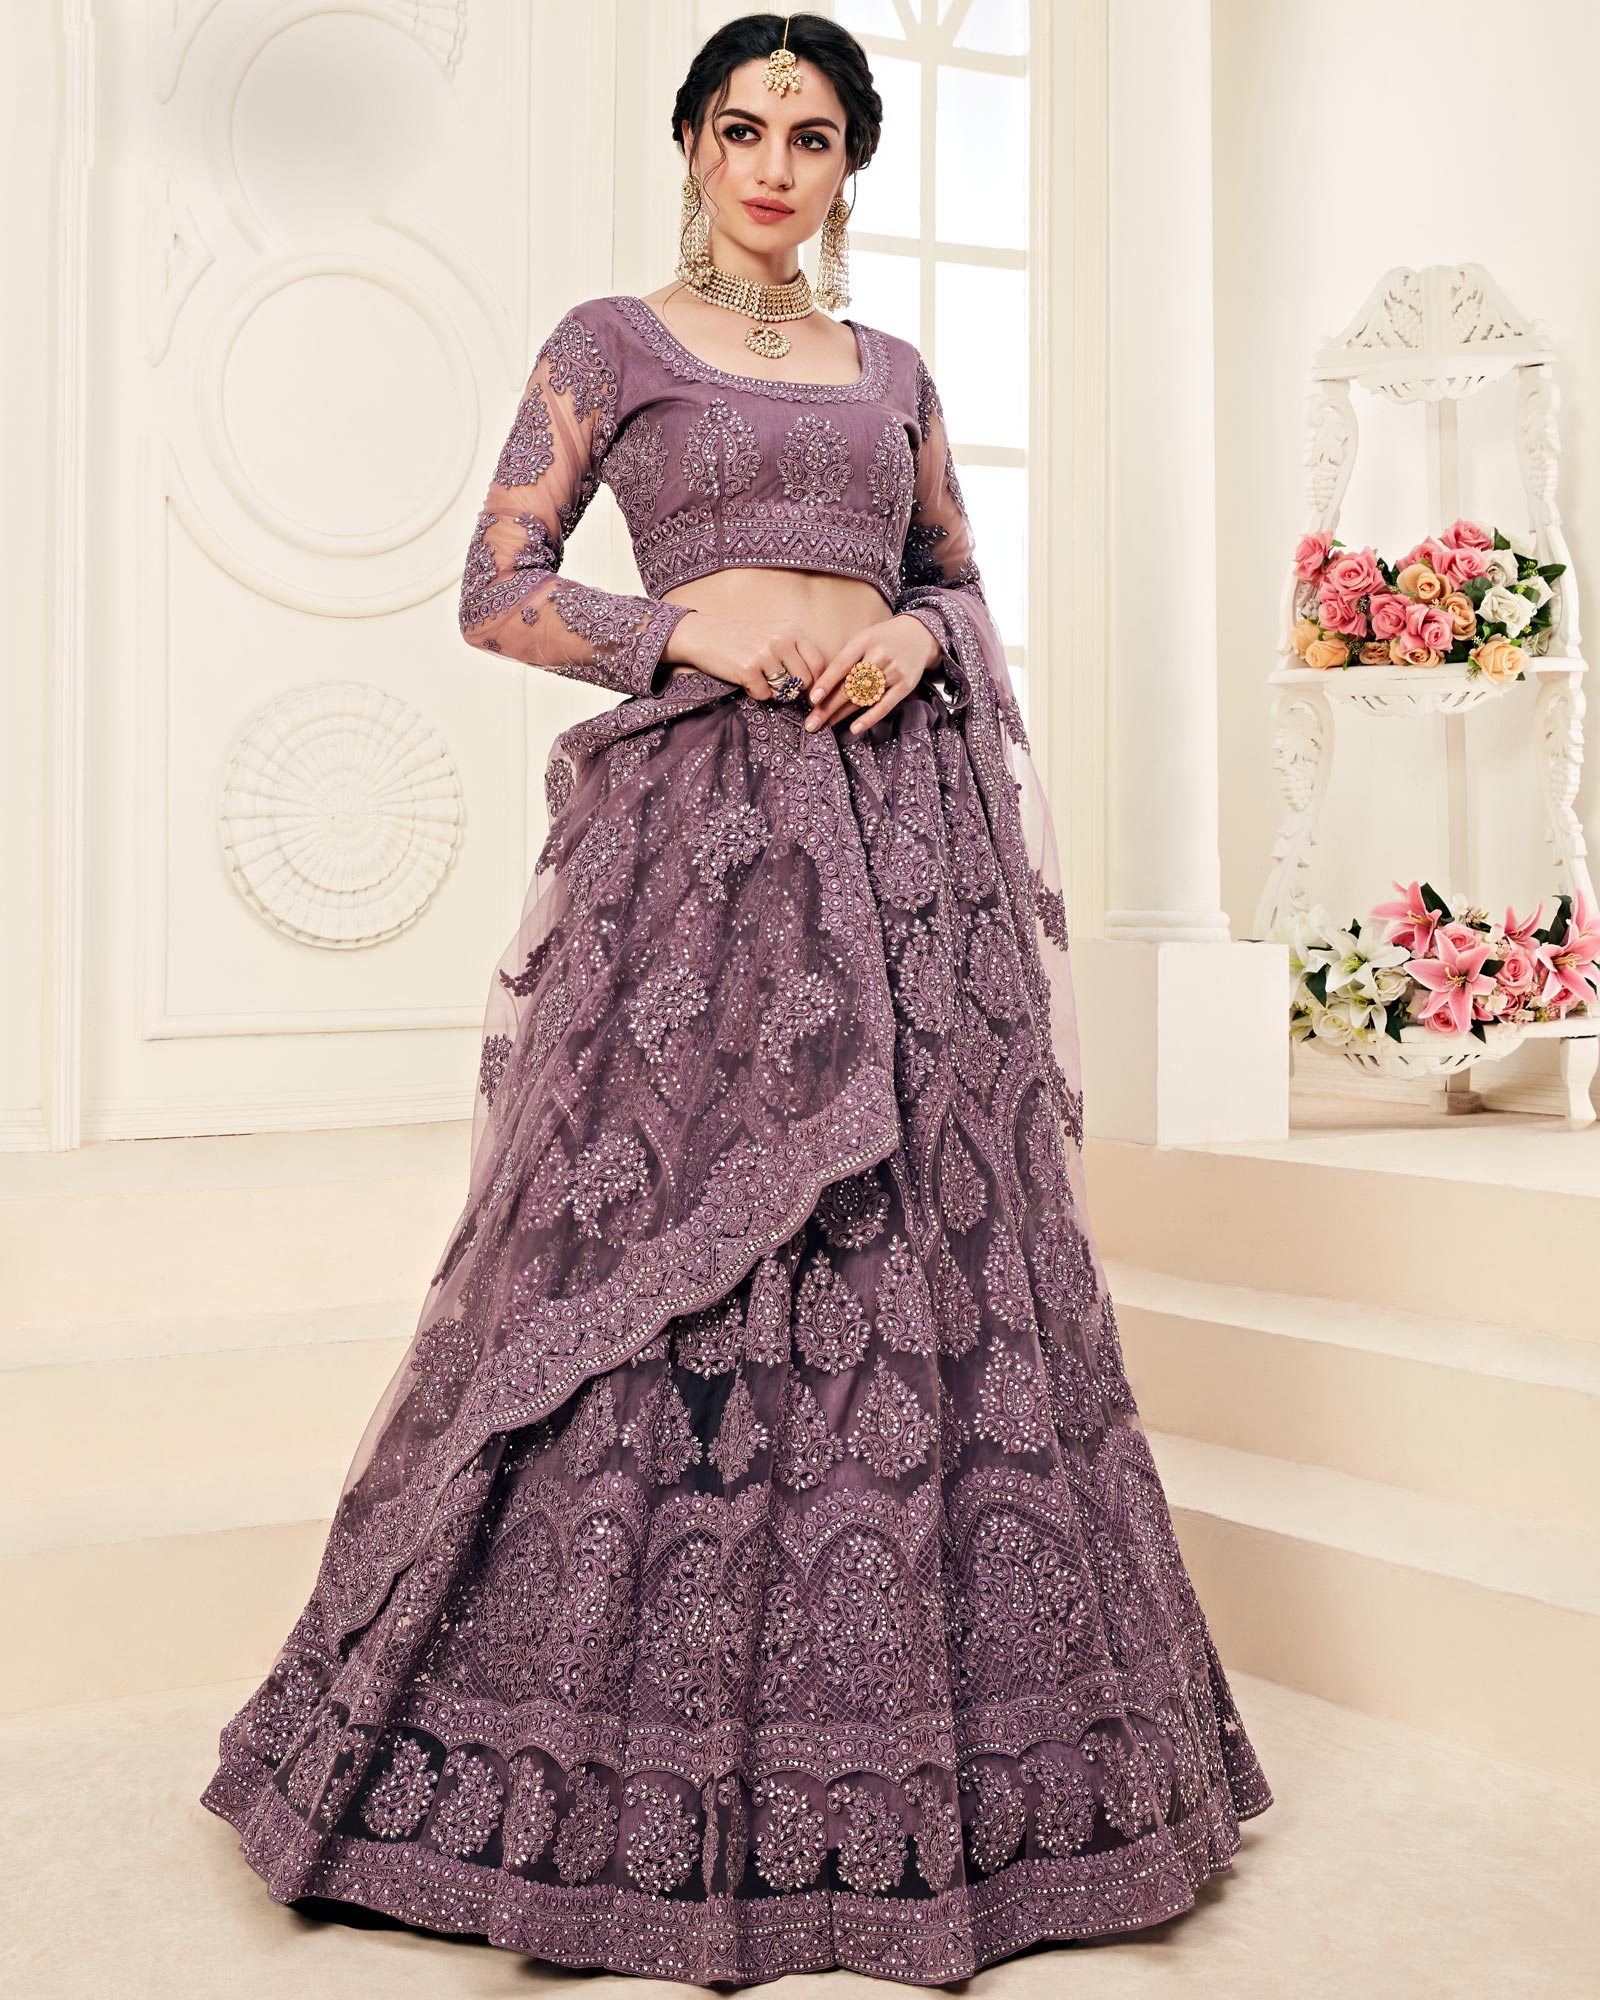 Bridal Lehengas Without Dupatta Are Trending And How | Stylish dress designs,  Indian designer outfits, Indian fashion dresses